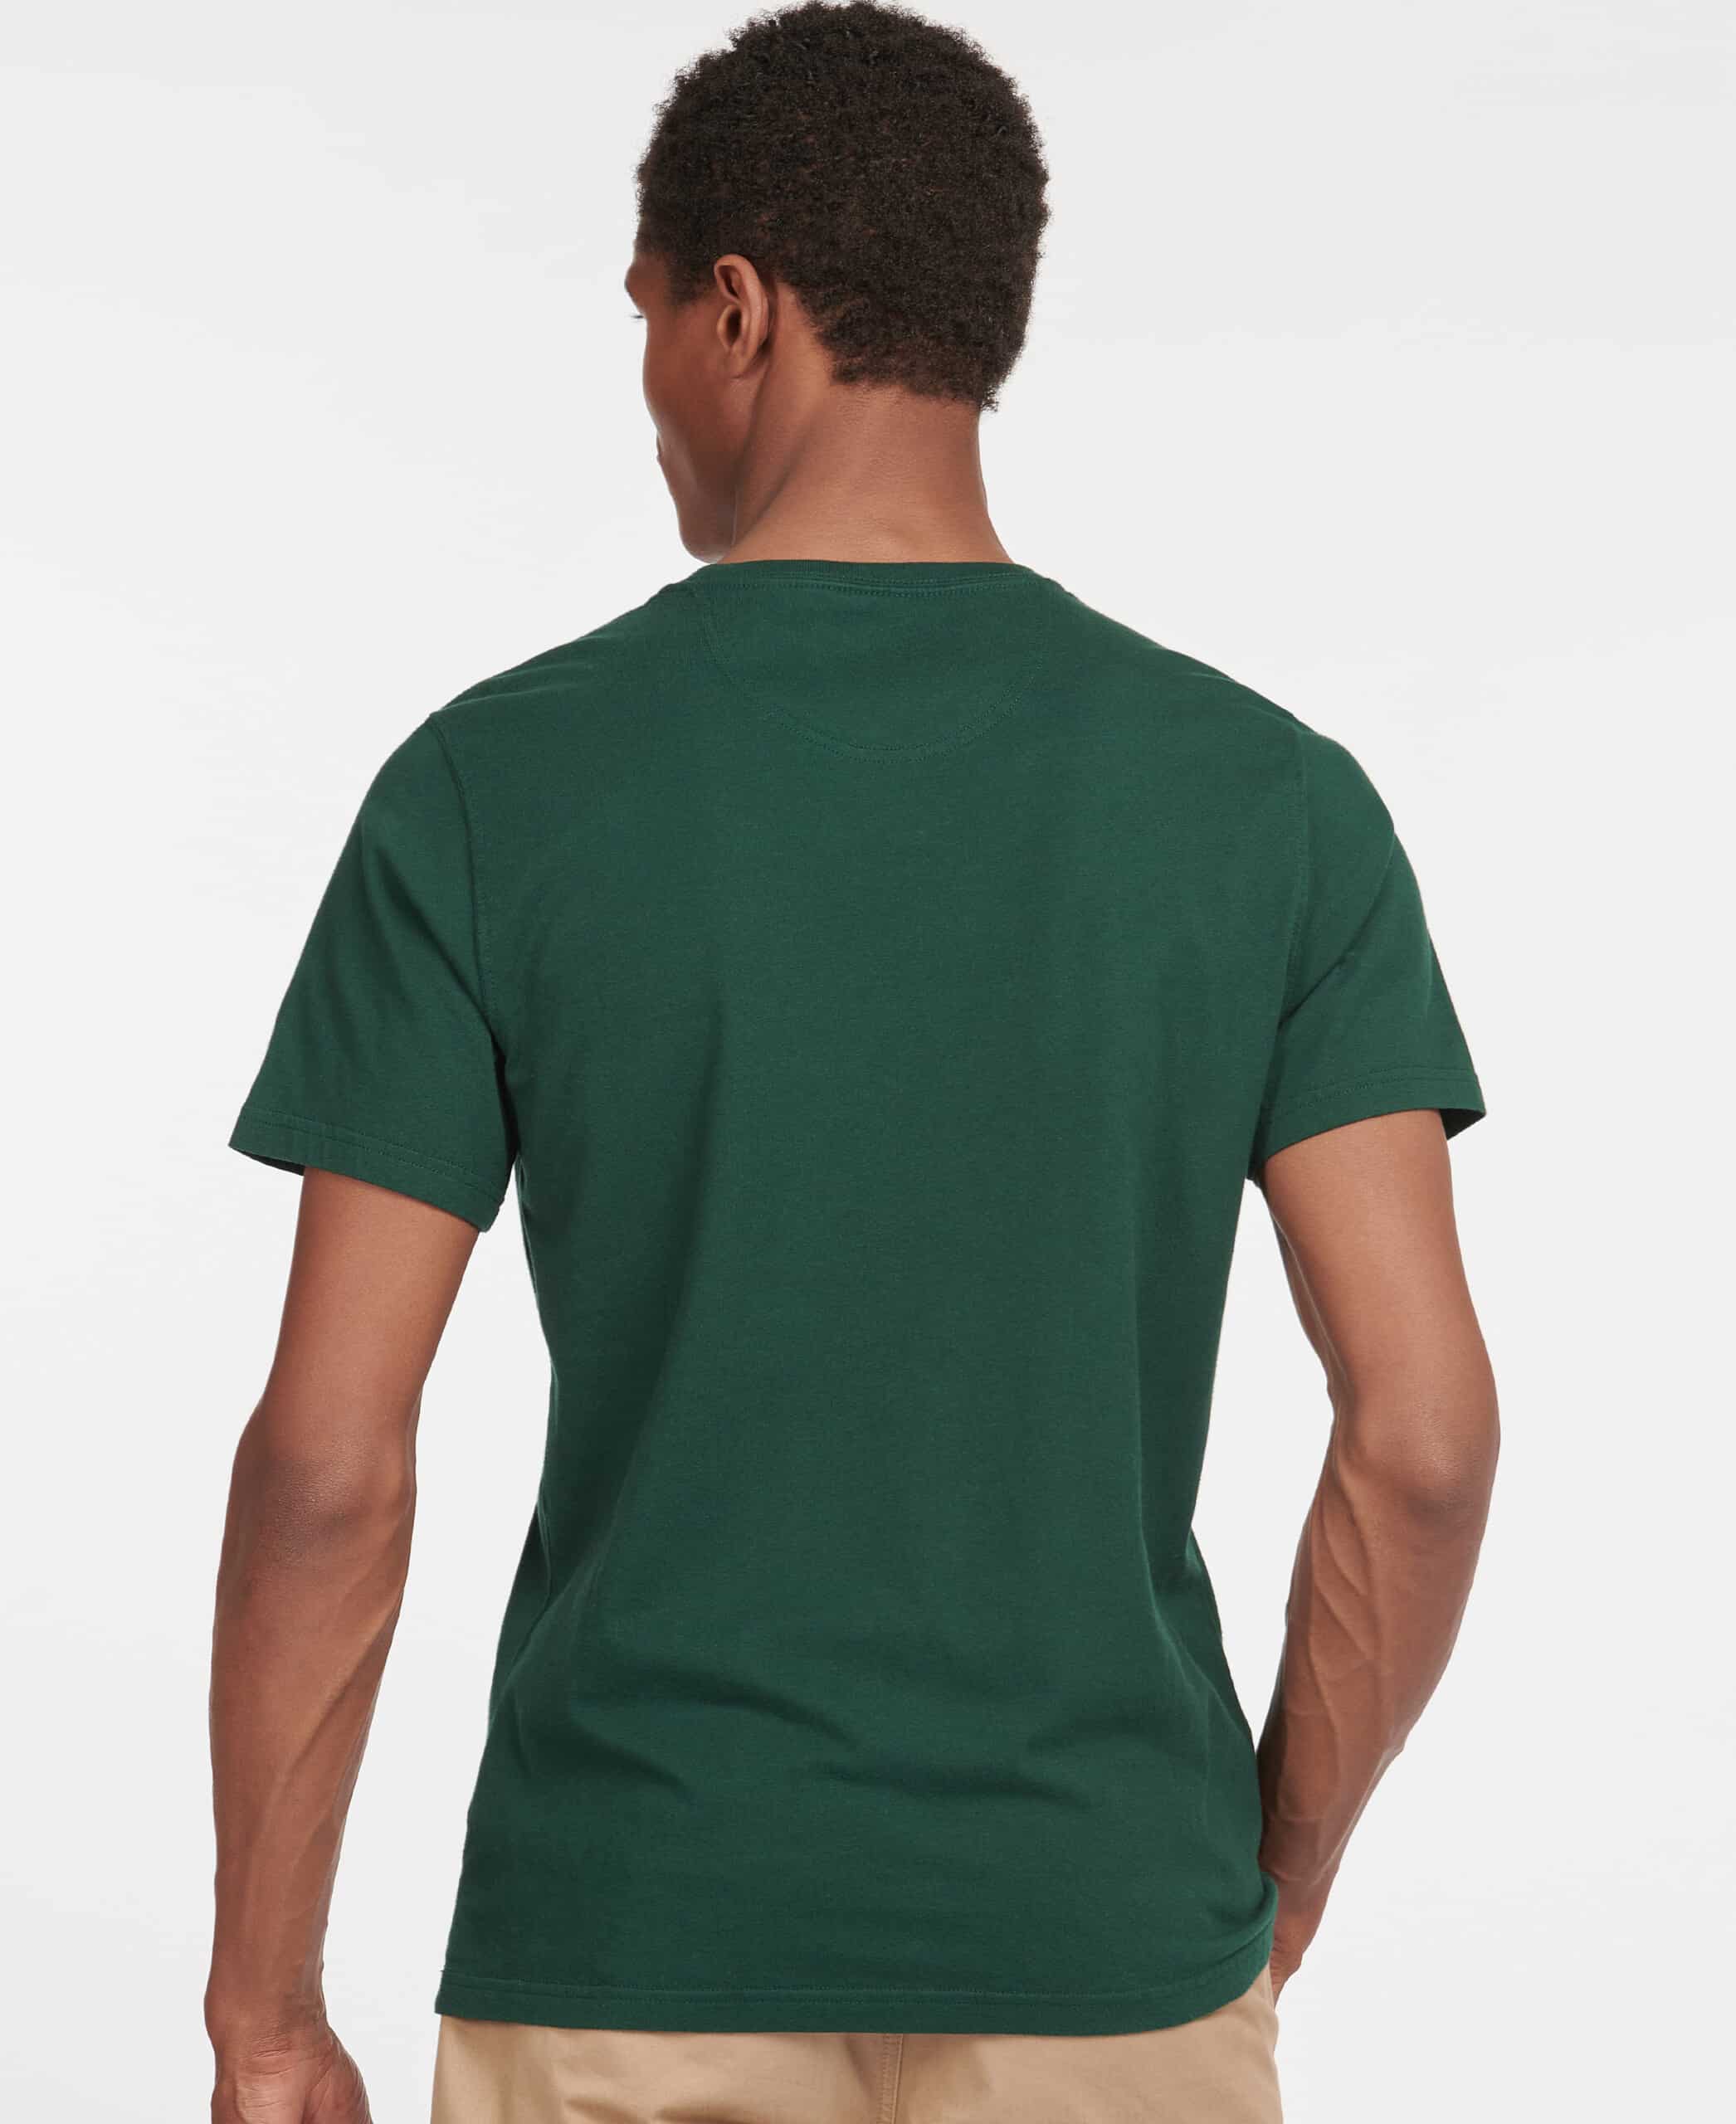 Sports T-Shirt - Seaweed - Out and About